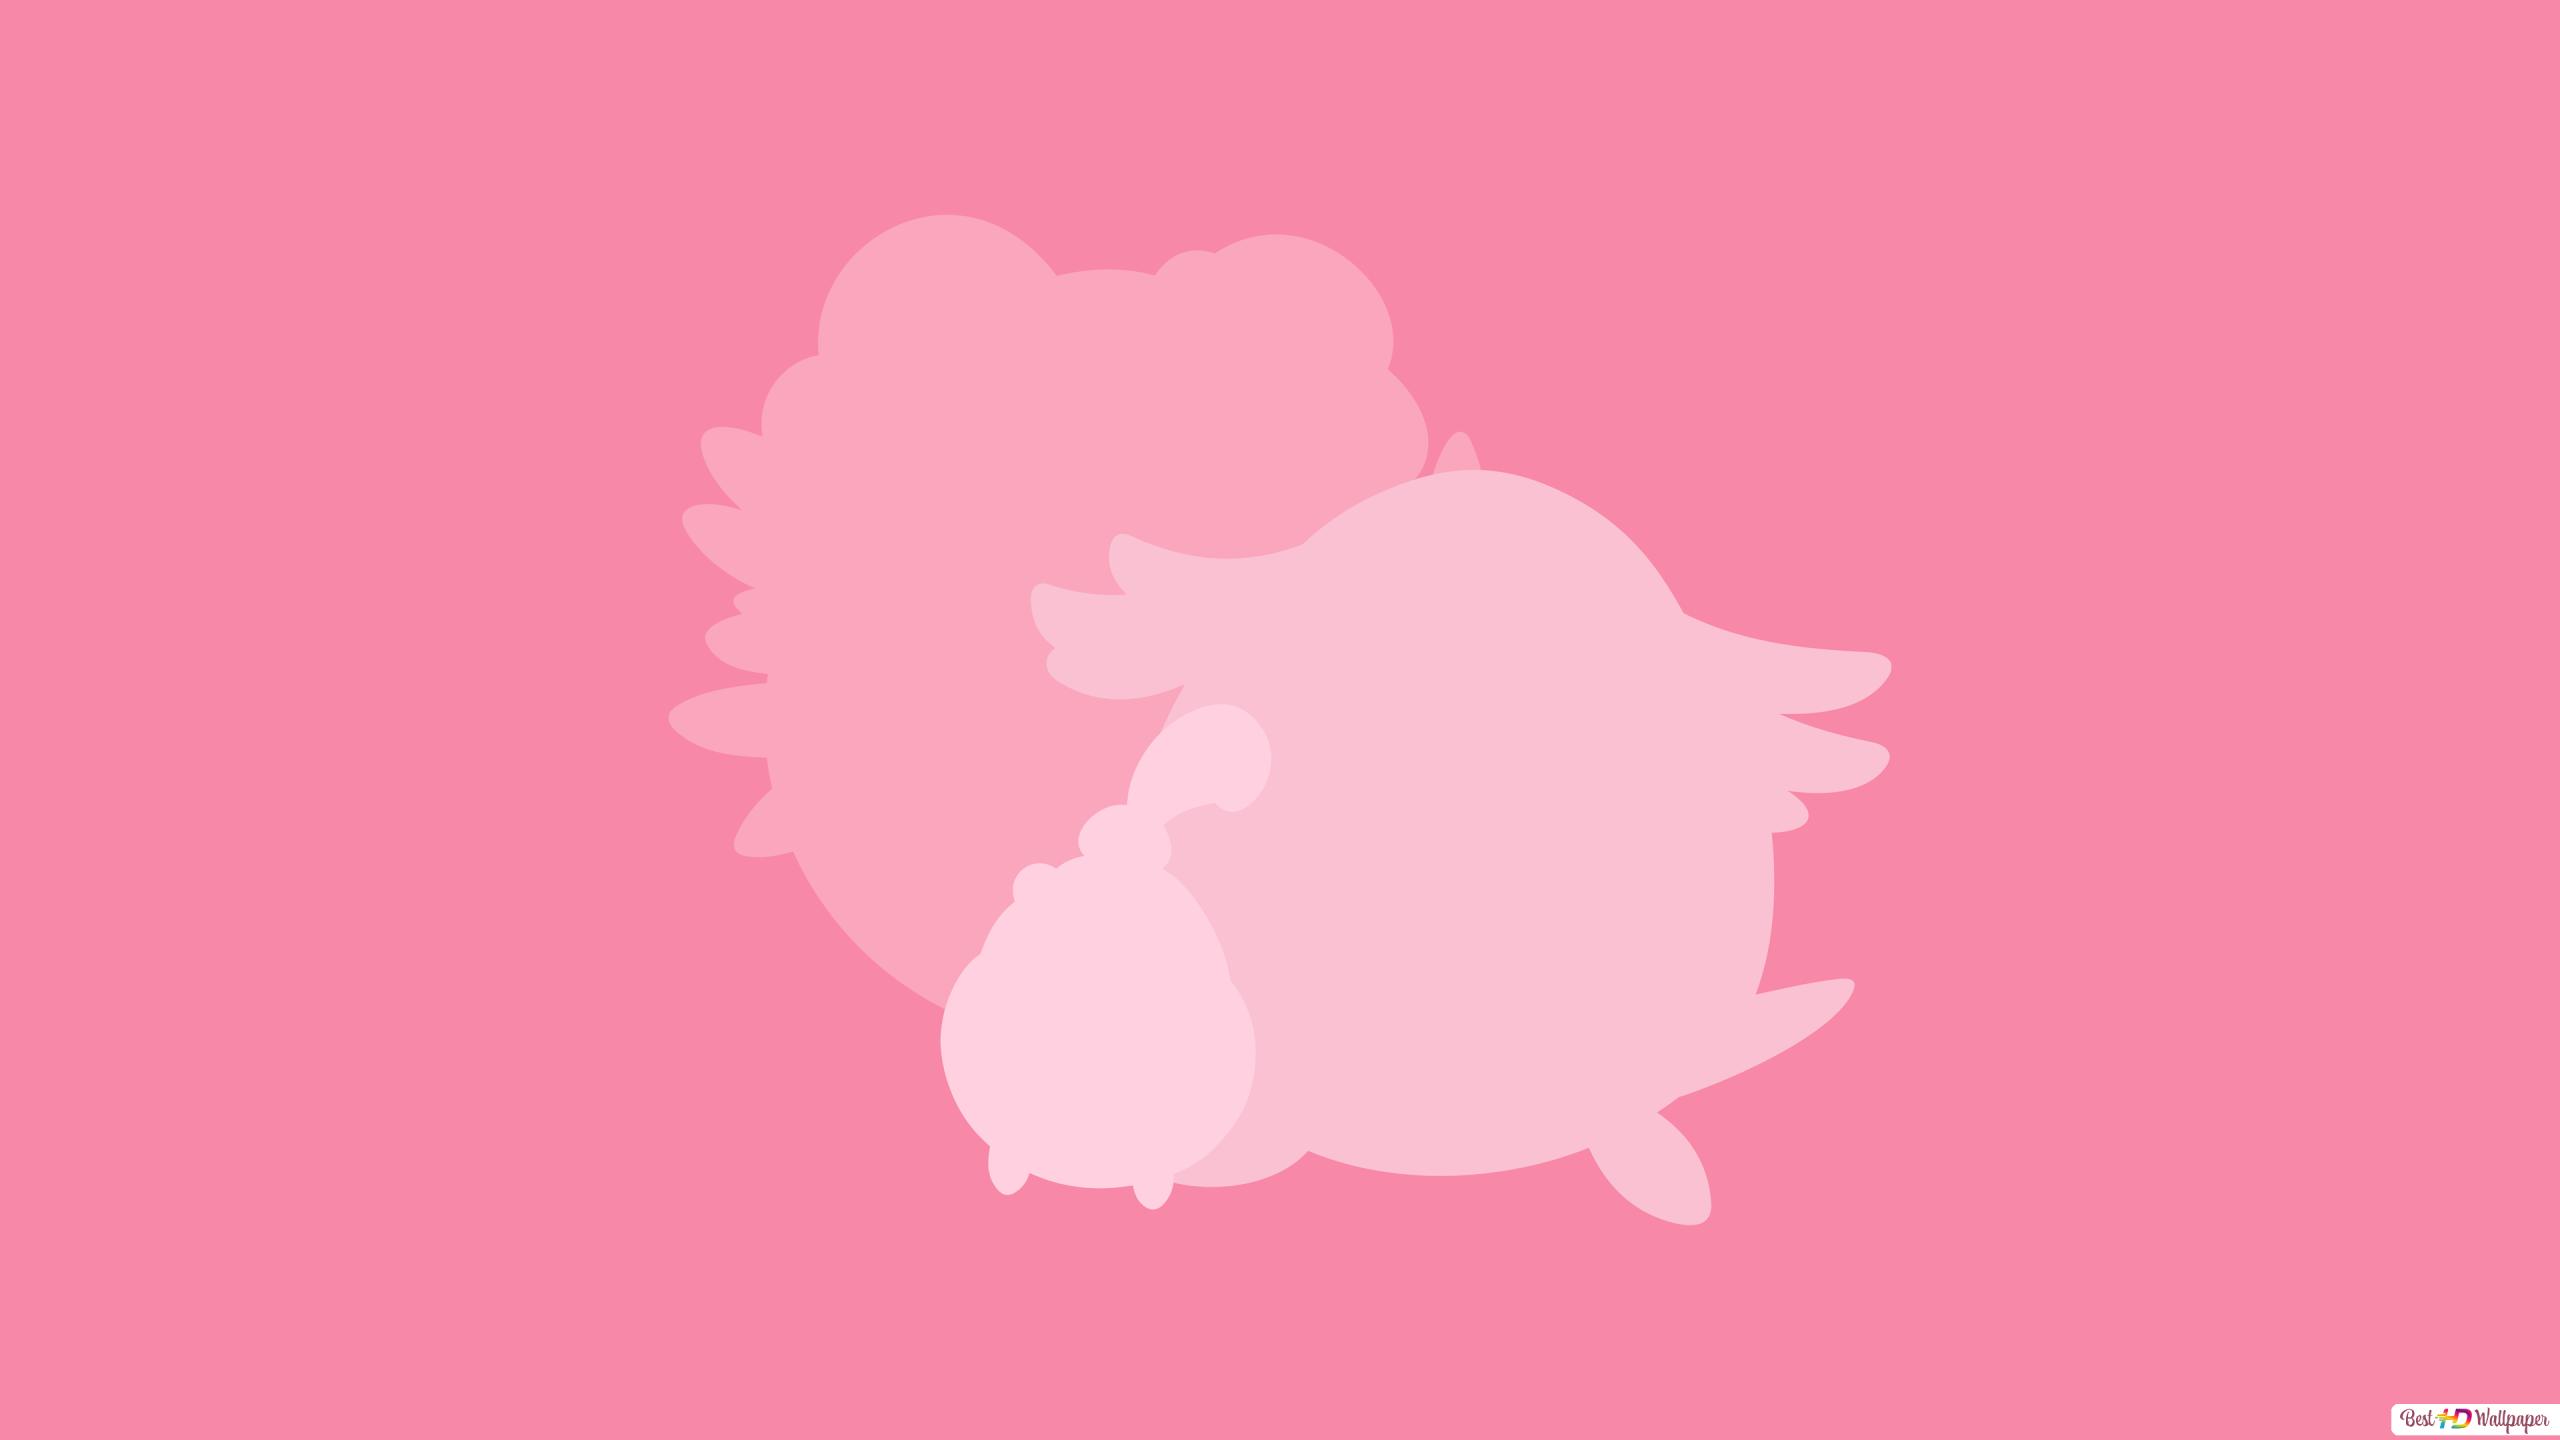 Chansey Hd Wallpapers